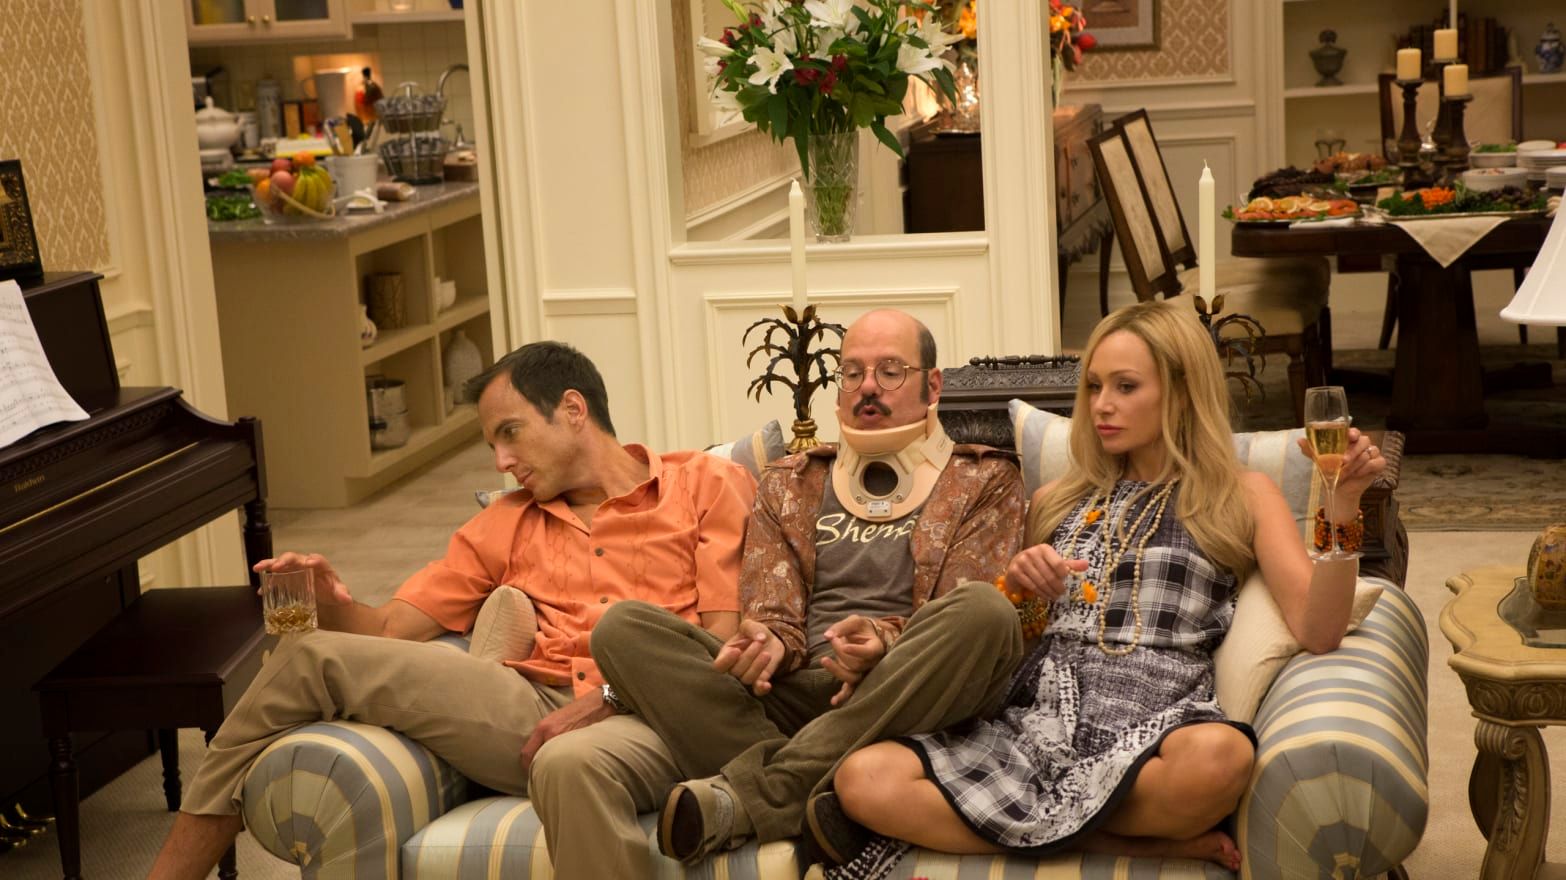 15 TV Shows Both Men And Women Can Binge Watch Together